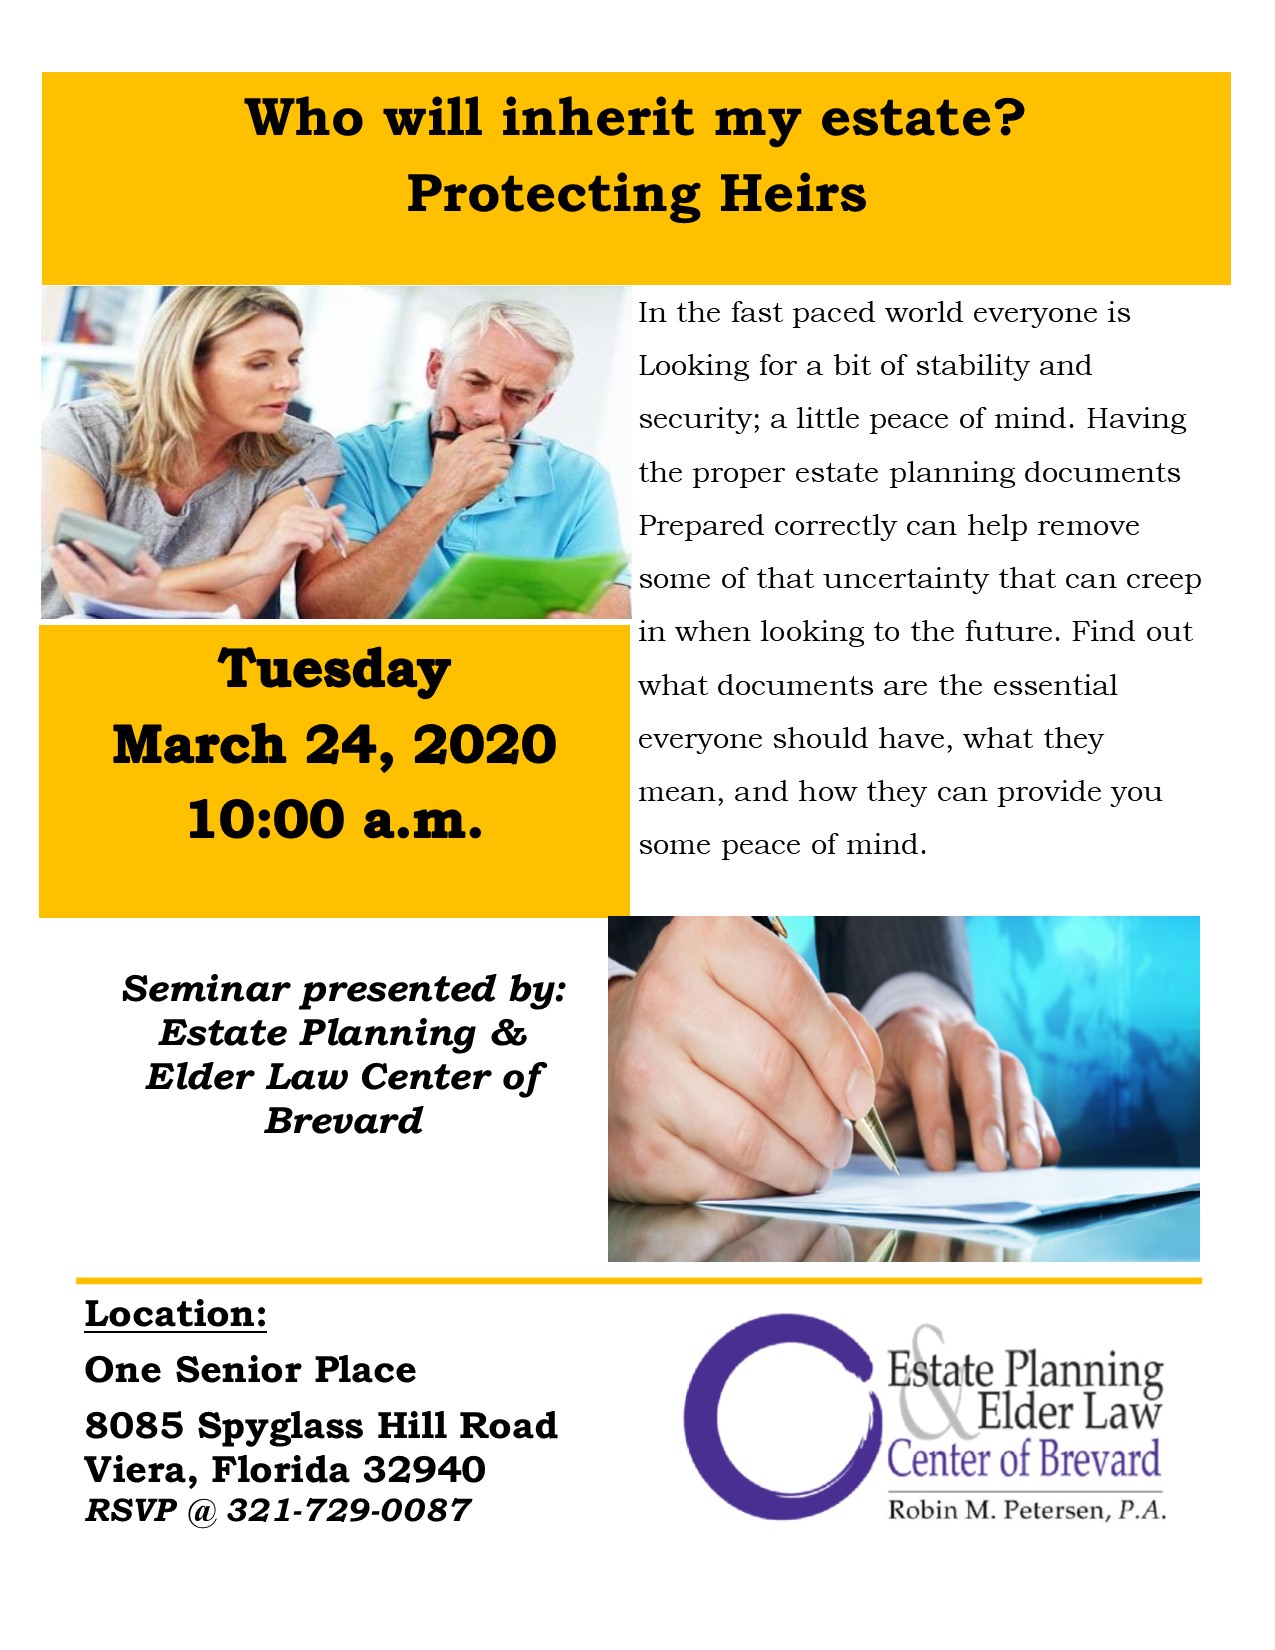 Who will inherit my estate?  Protecting Heirs presented by Estate Planning and Elder Law Center of Brevard